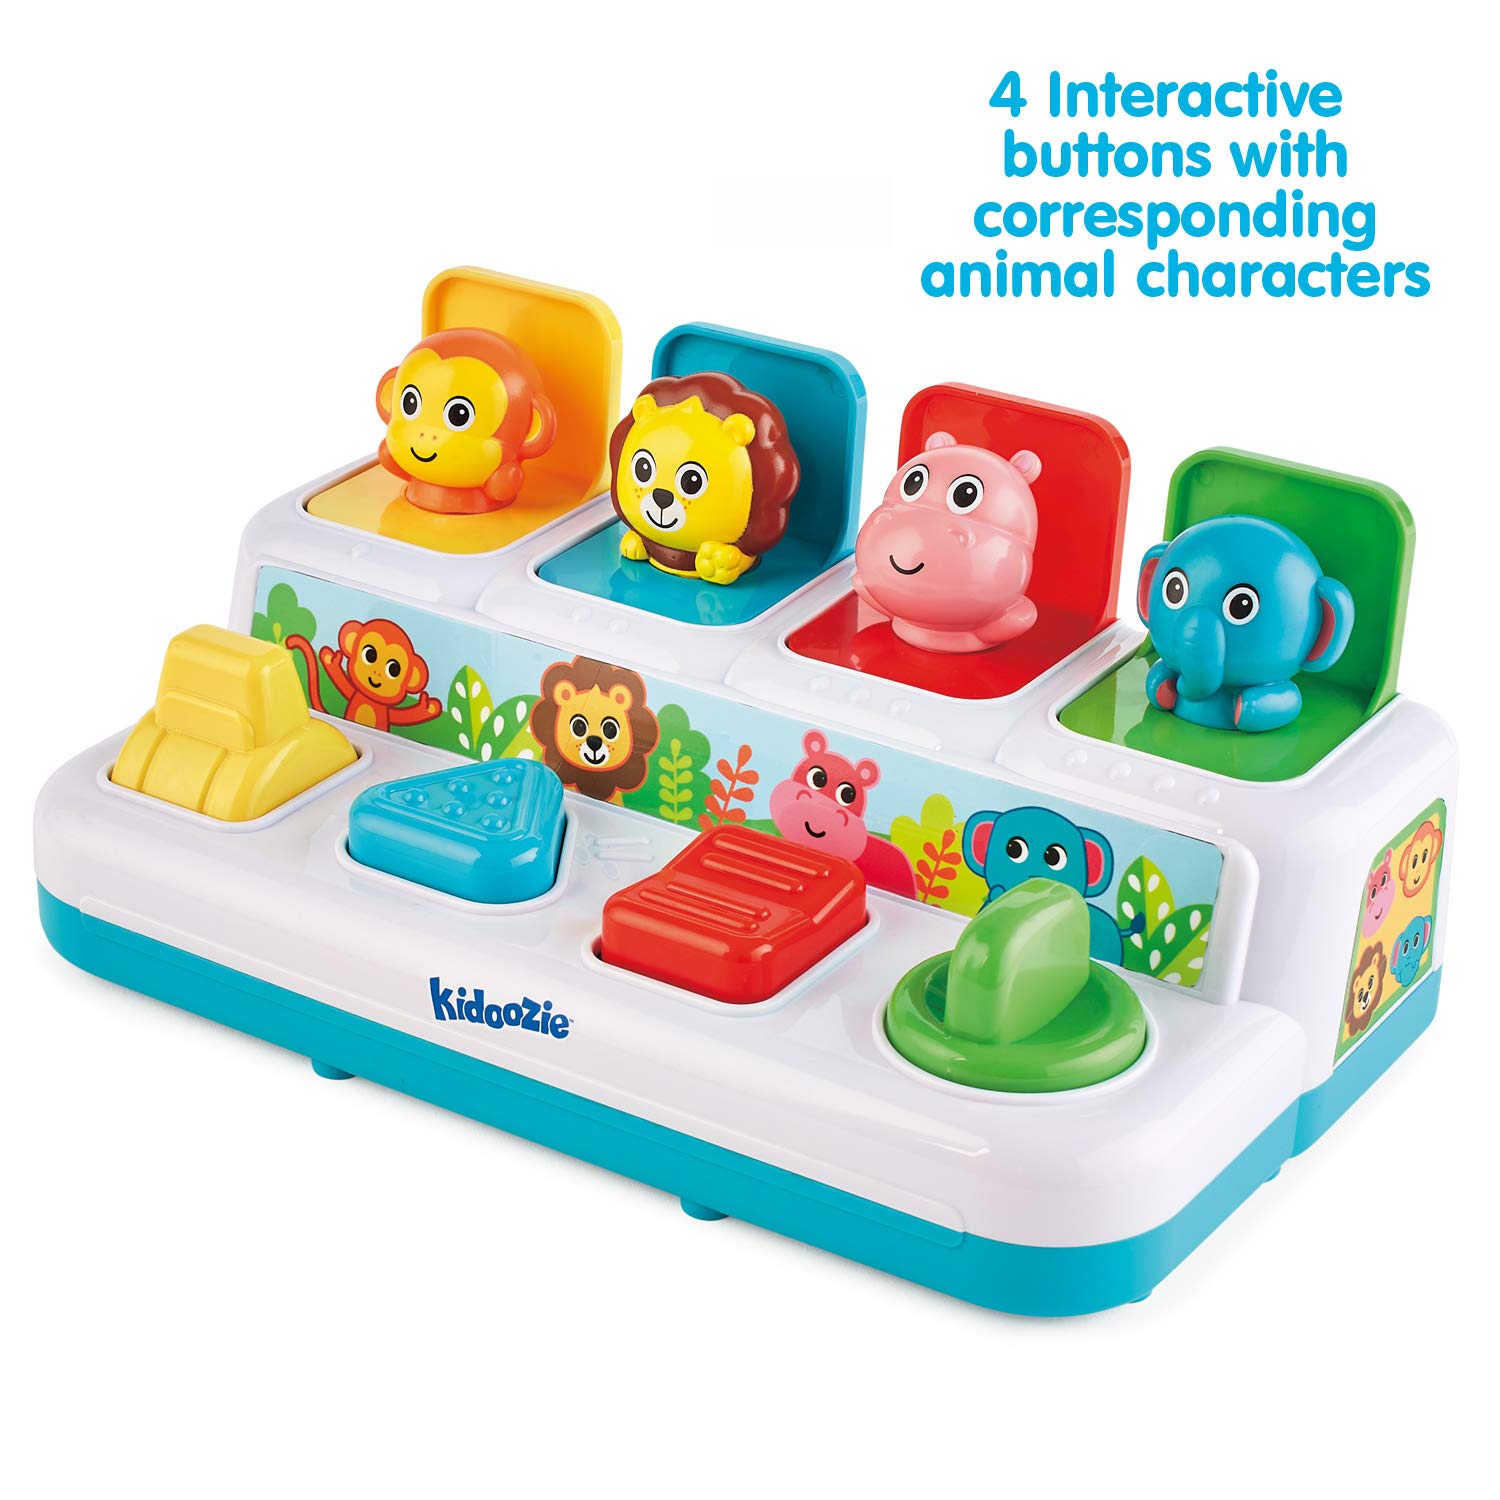 Kidoozie Pop ‘n Play Animal Friends, Pop Up Activity Toy for Learning Colors, Numbers, Animal Names and Sounds; Suitable for Toddlers Ages 12 Months and Older